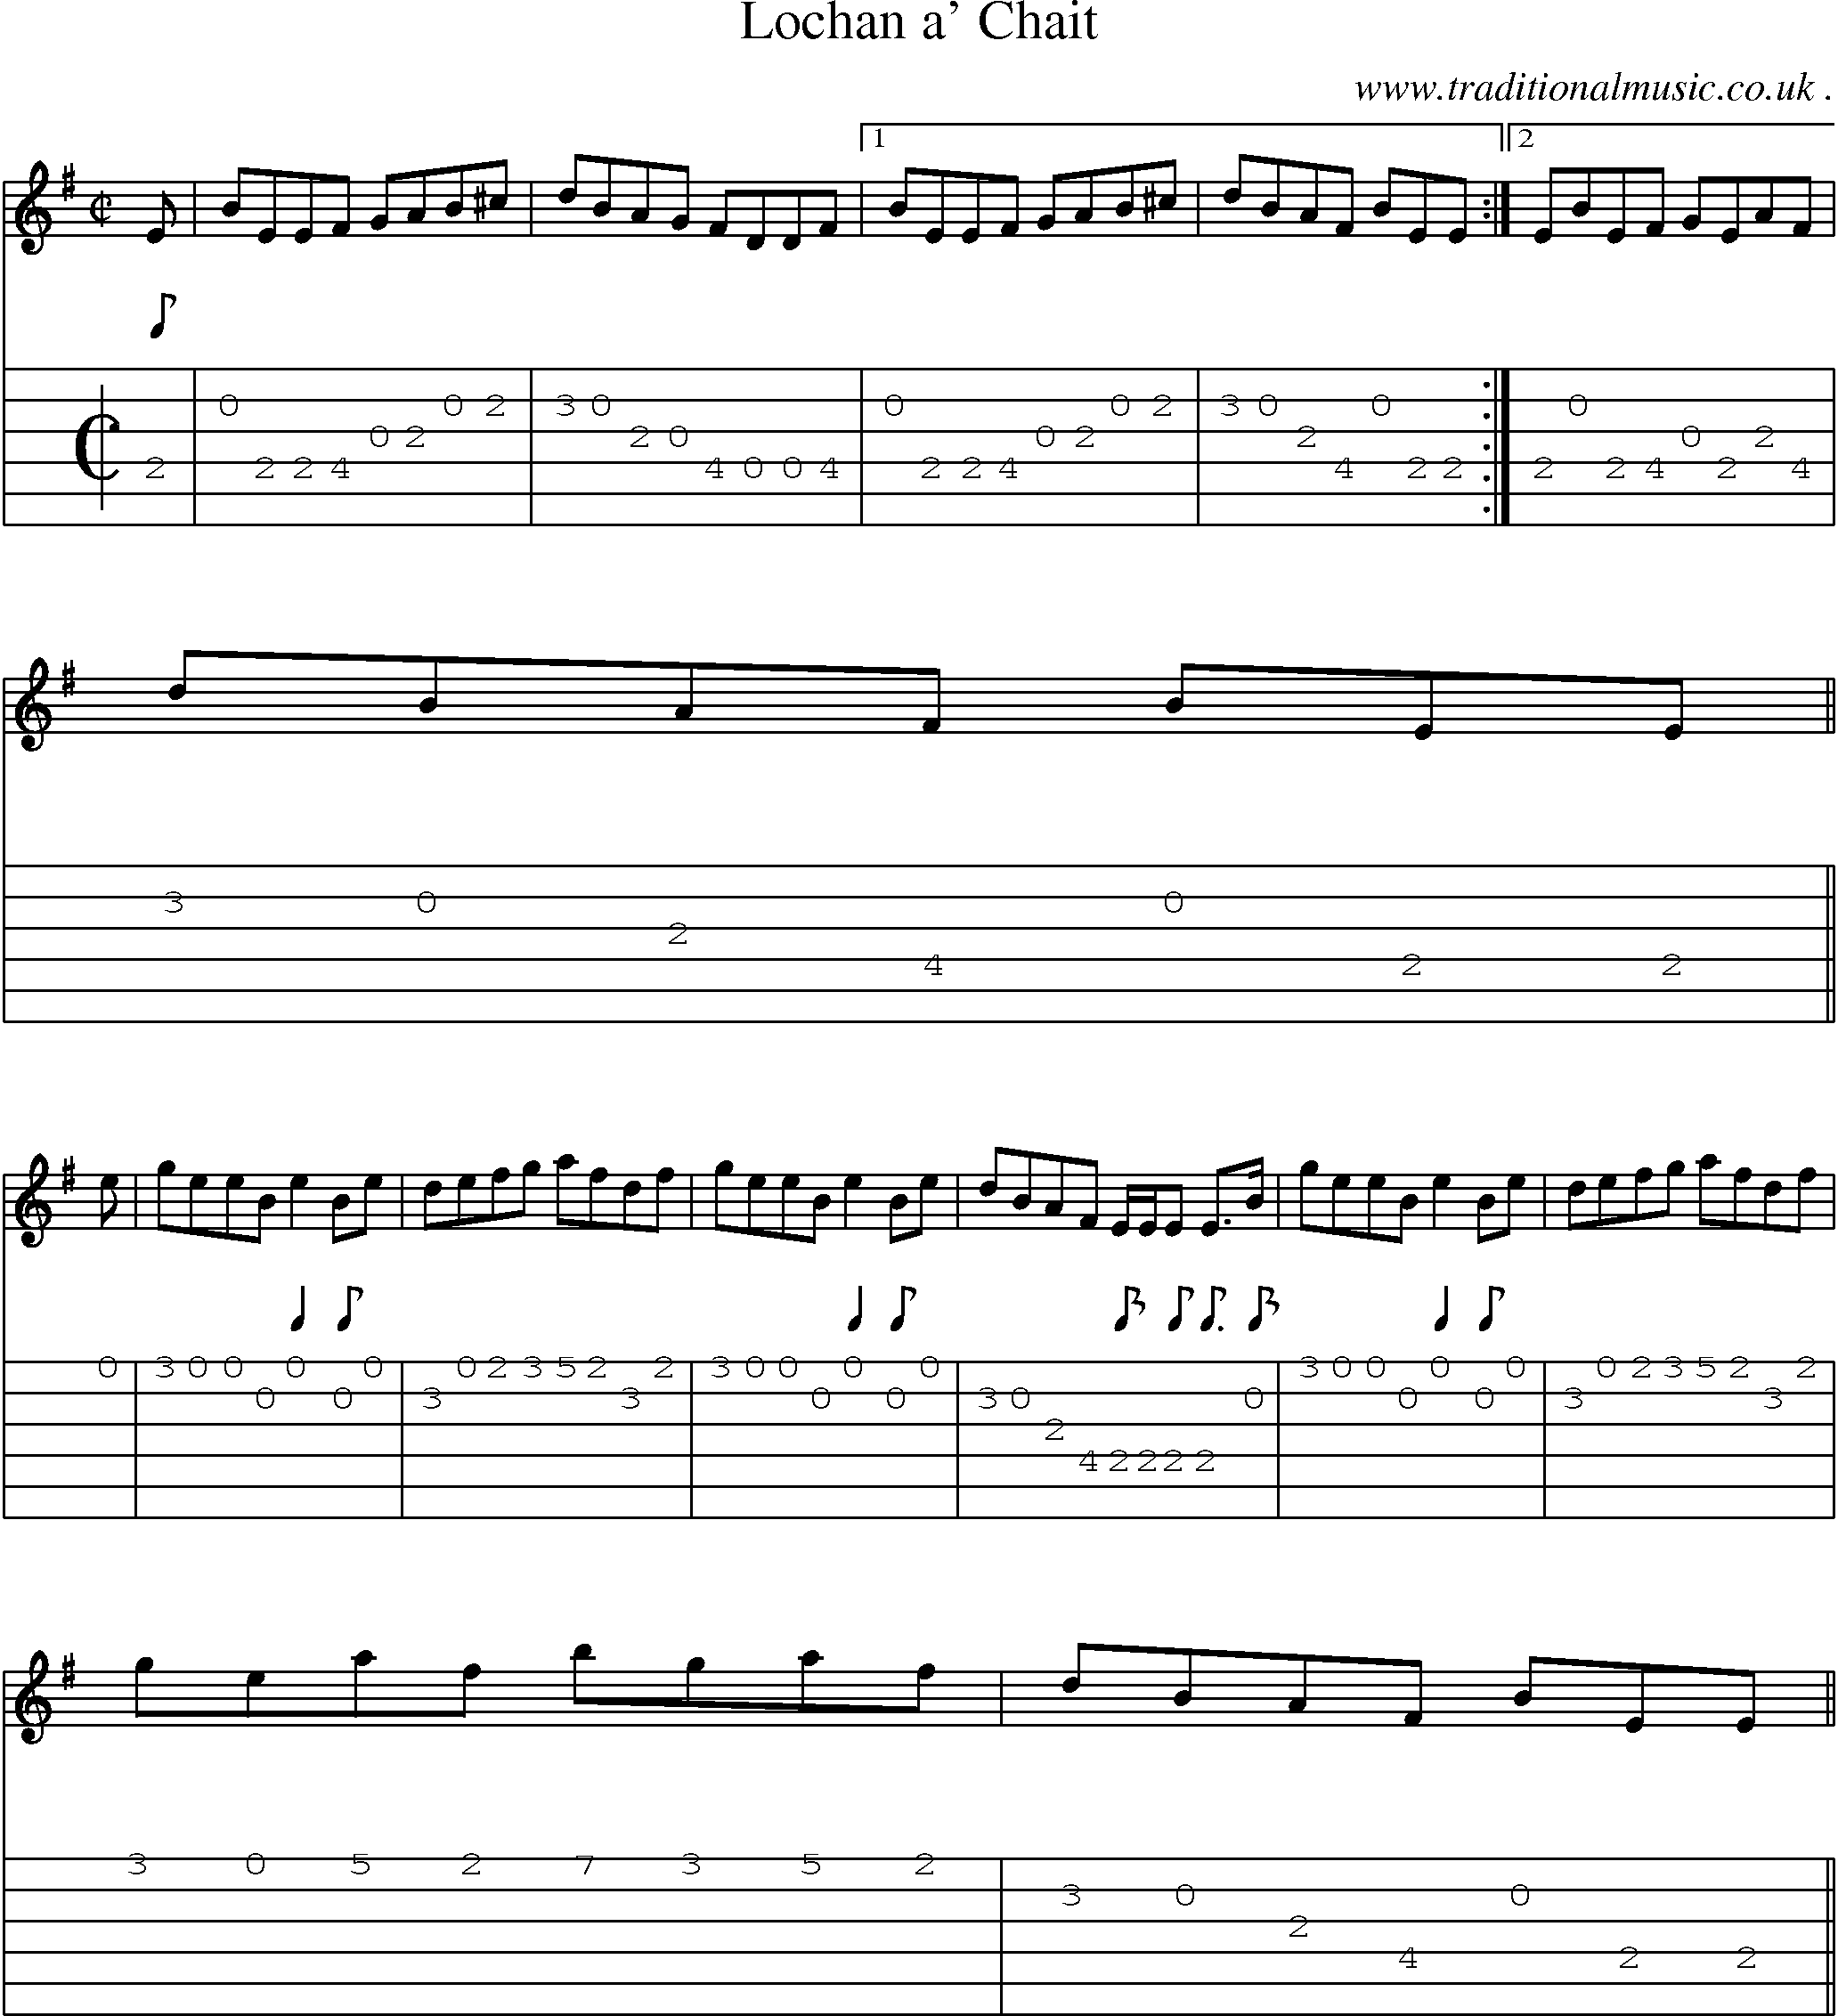 Sheet-music  score, Chords and Guitar Tabs for Lochan A Chait